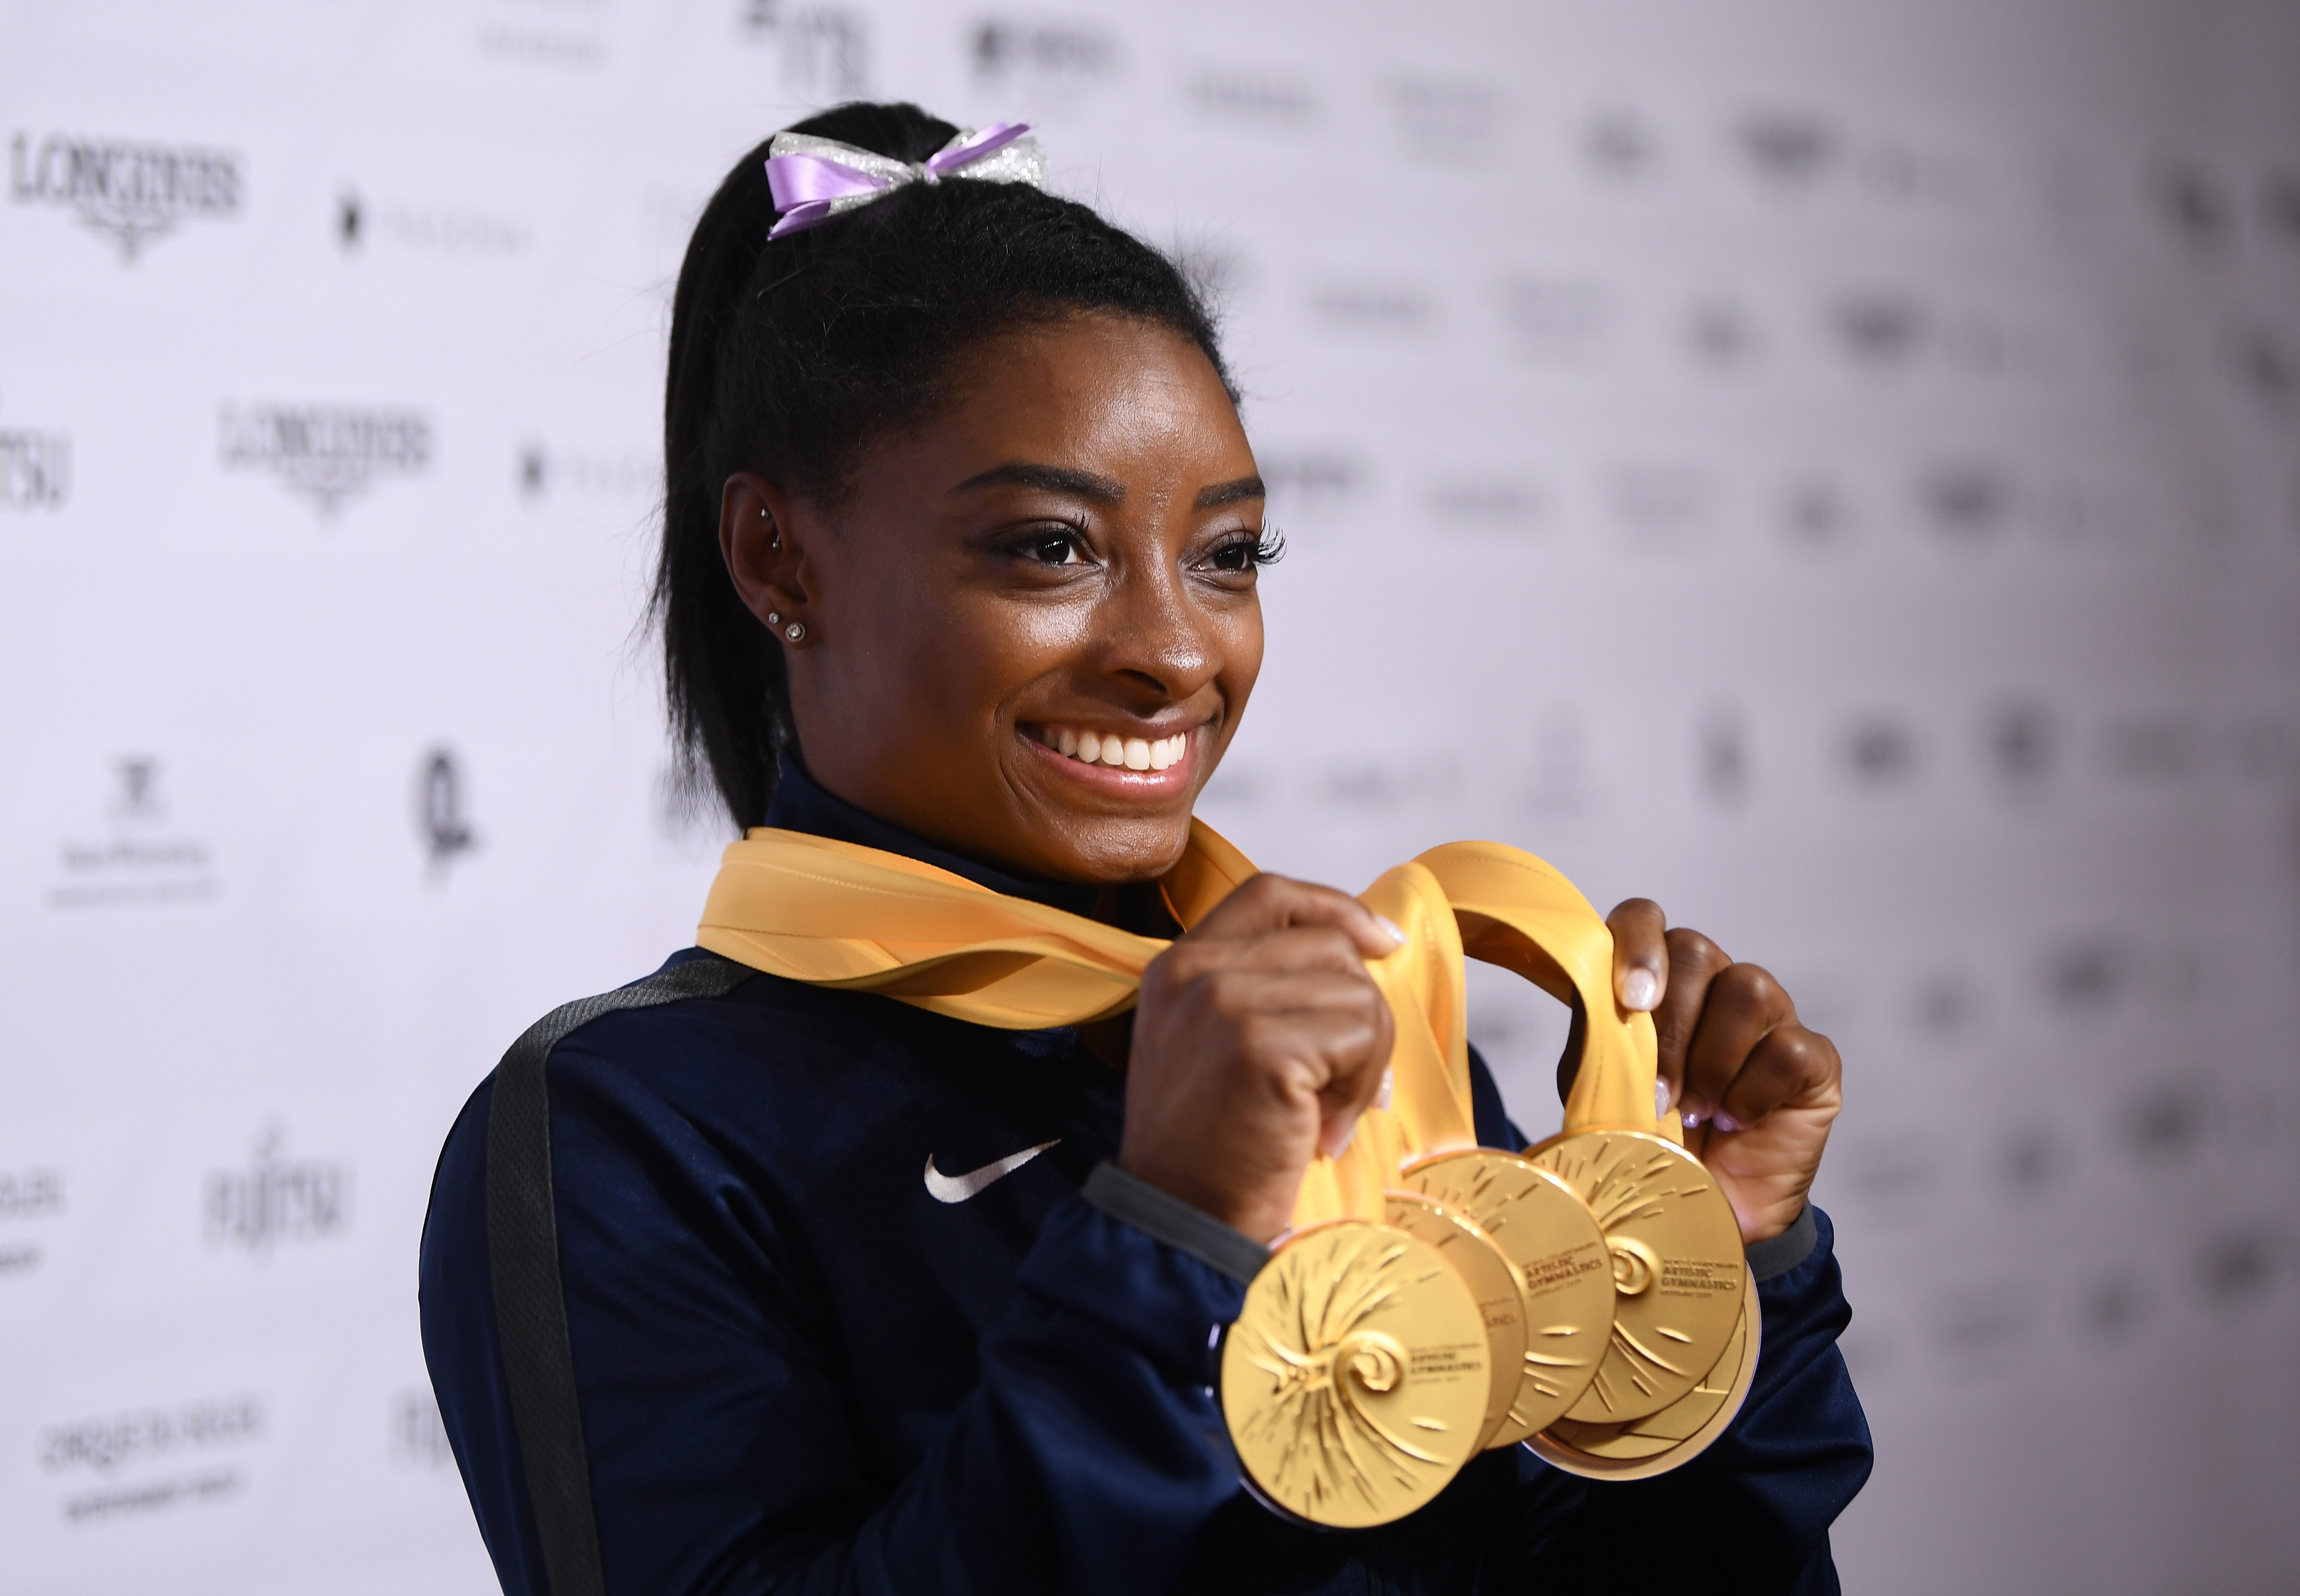 Simone Biles on October 13, 2019 in Stuttgart, Germany | Source: Getty Images